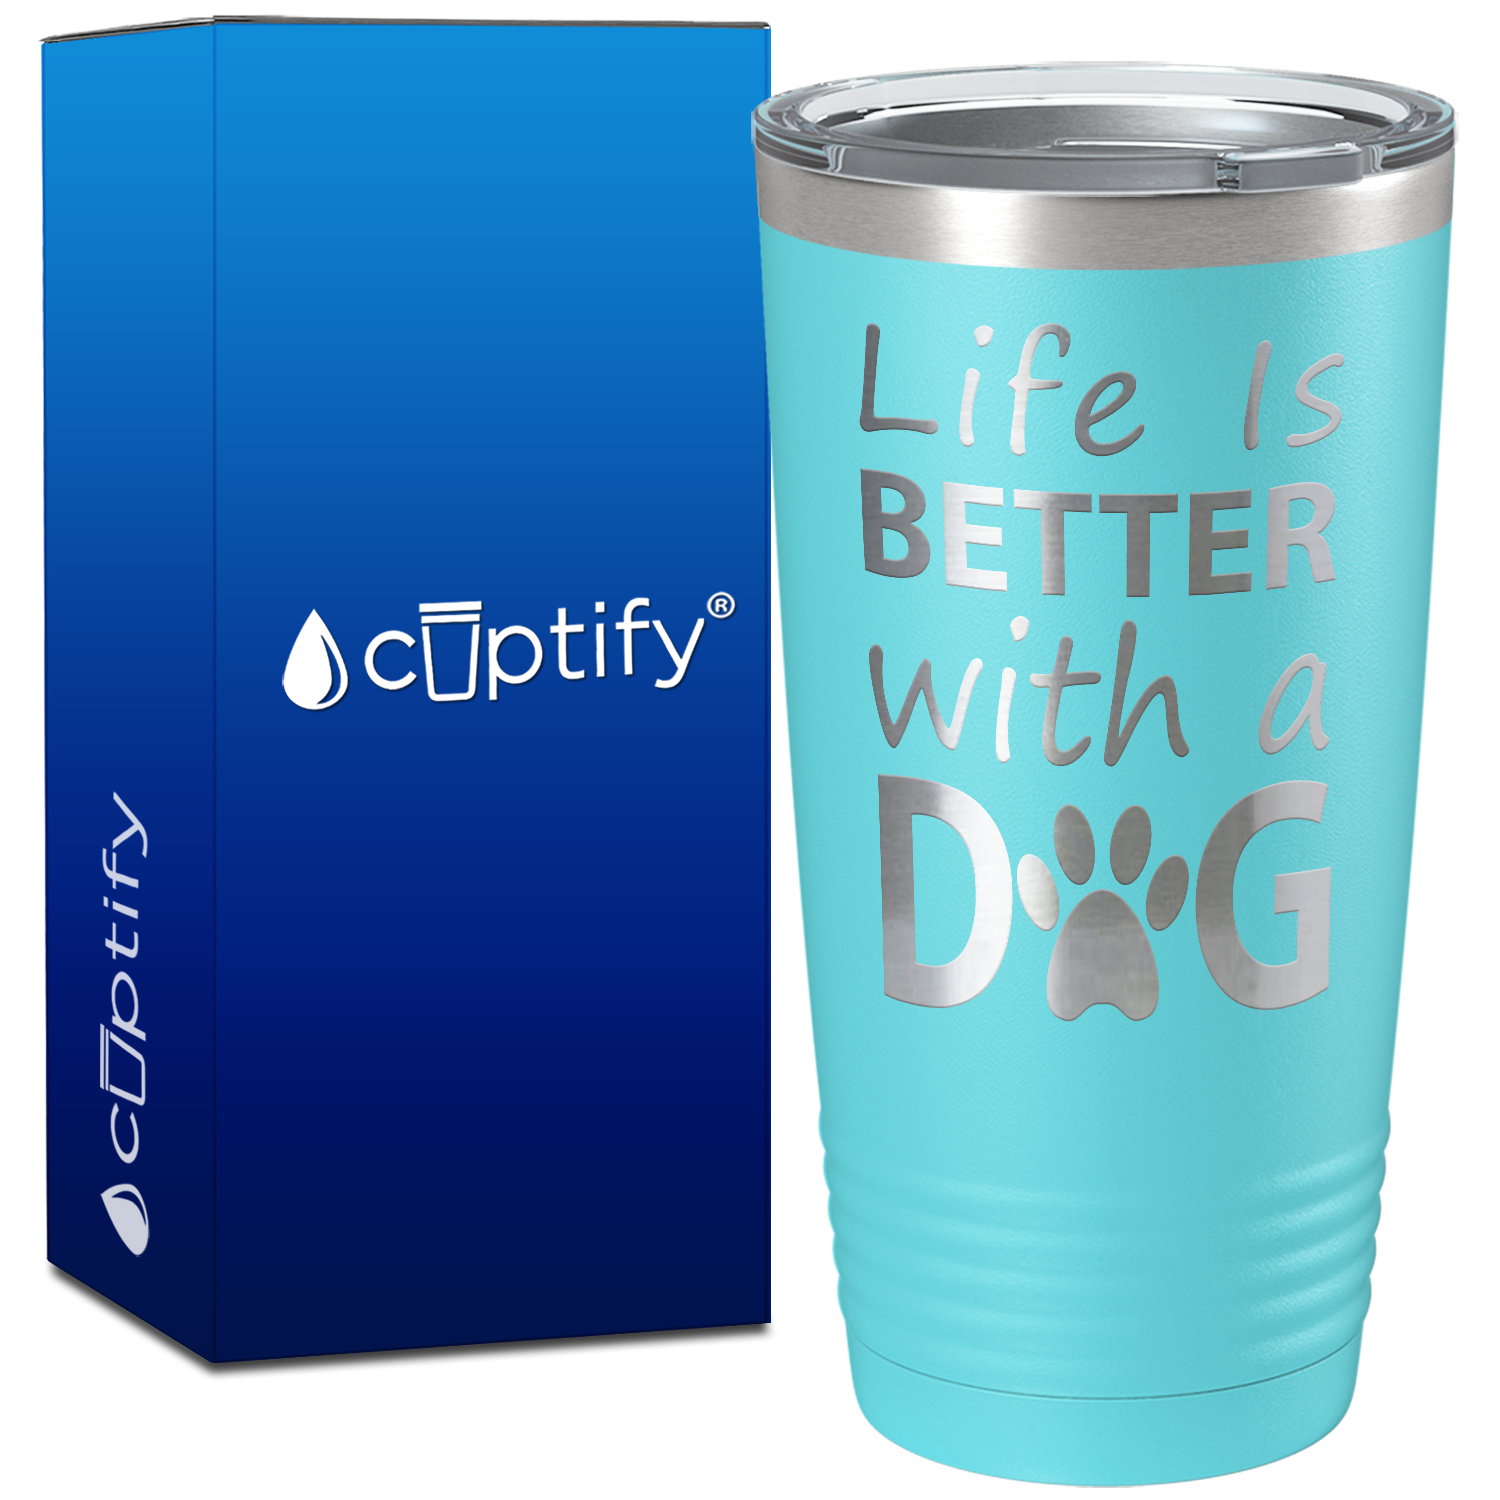 Life is Better with a Dog on 20oz Tumbler